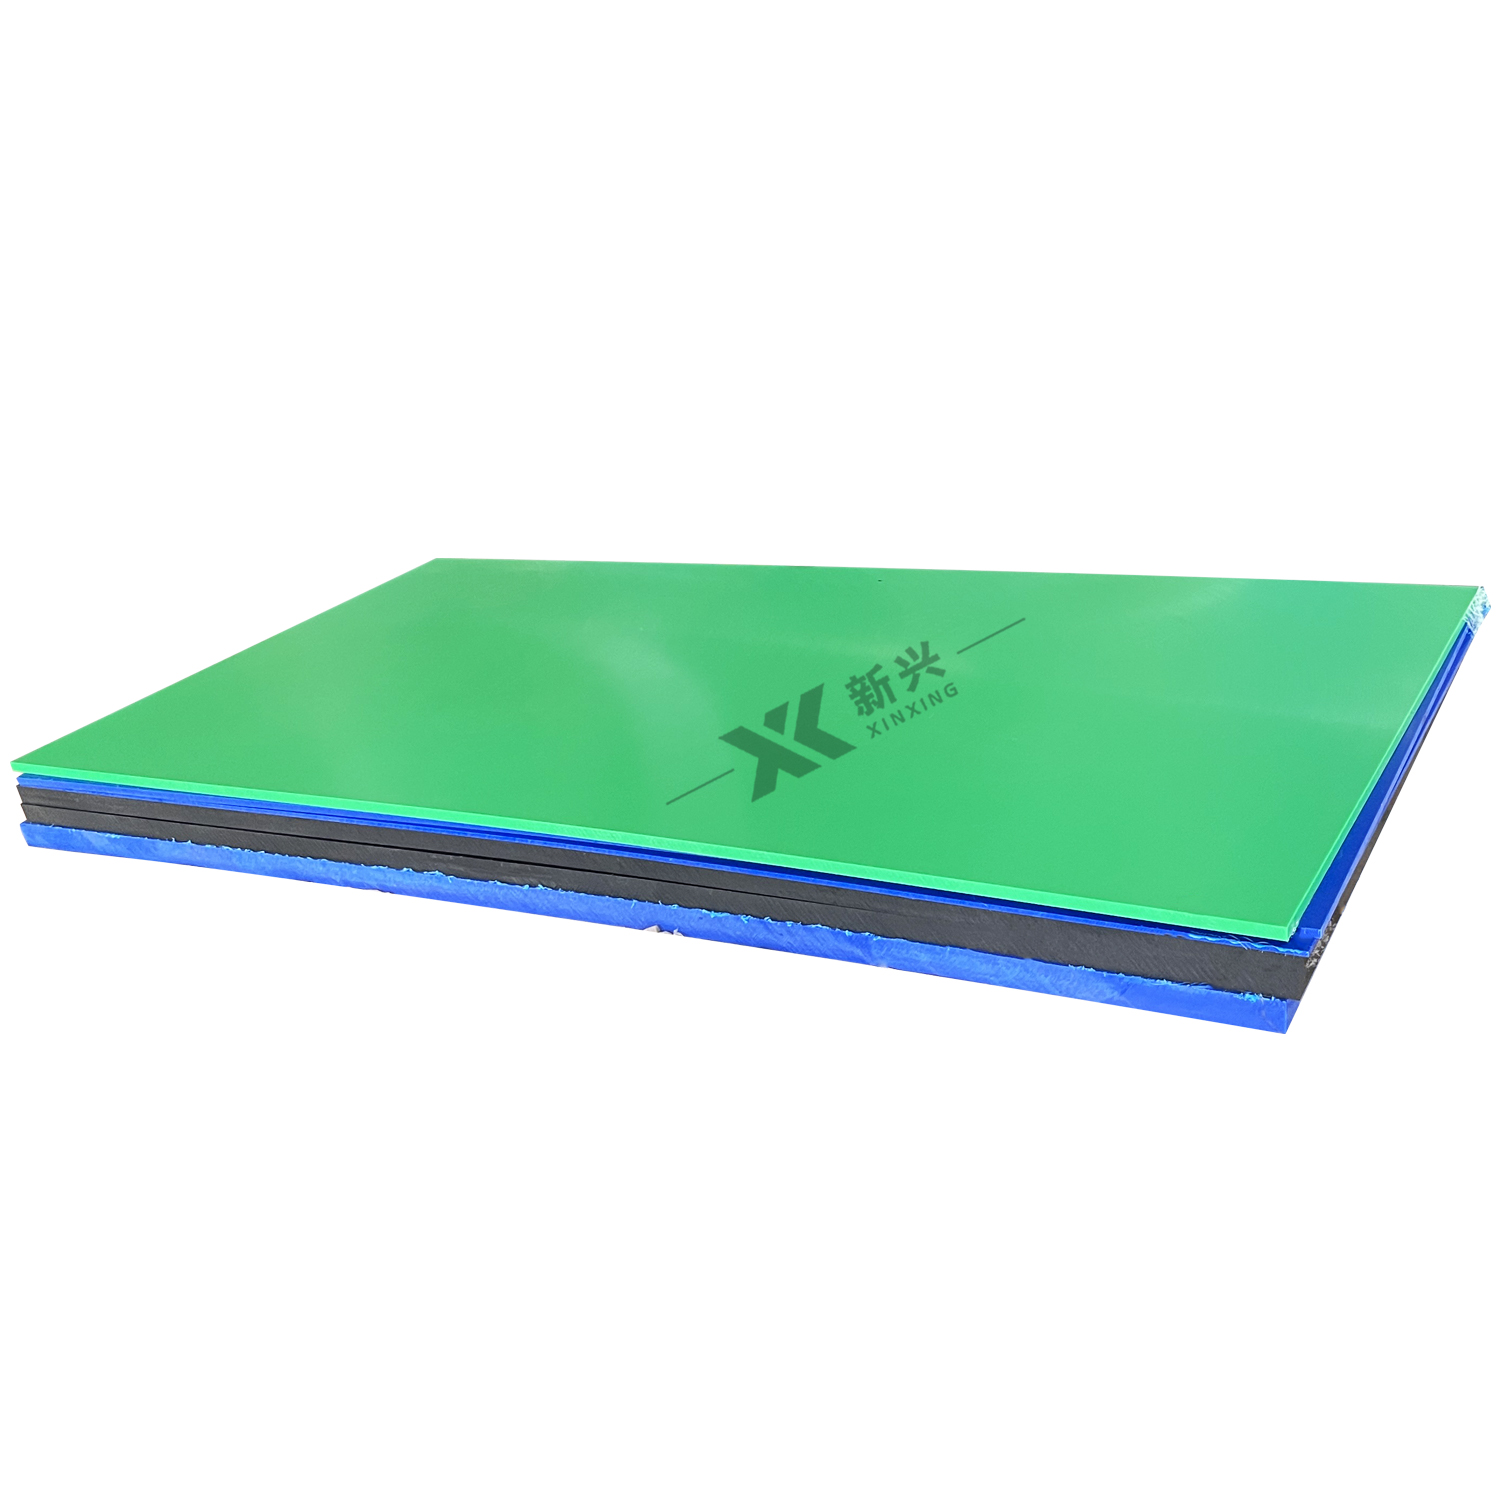 Extruded Sandwich Three Layer Hdpe Double Color Plastic Sheet 